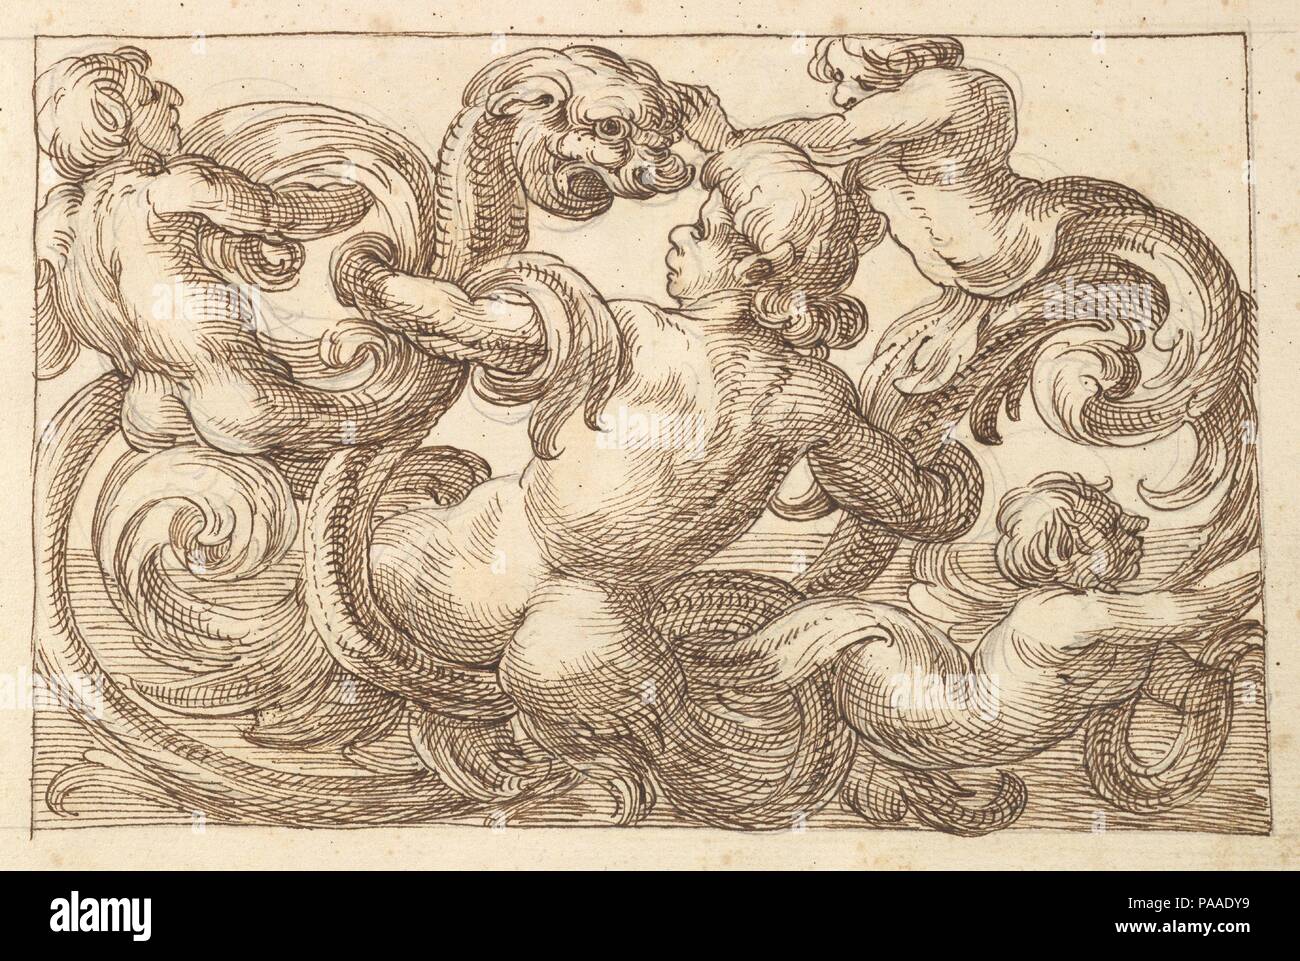 Horizontal Panel Design with Four Hybrid Male Figures and a Fantastical Creature Interspersed between Acanthus Rinceaux. Artist: Anonymous, Italian, Venetian, 17th century; In the manner of Polifilo Giancarli (active in Venice ca. 1600-1625). Dimensions: Sheet: 7 1/4 x 10 5/16 in. (18.4 x 26.2 cm). Date: 17th century (first half).  Design for a horizontal panel with a male figure in the middle, seen from the back, whose lower body consists of rinceaux which meander across the page. He looks left, into the eyes of a fantastical creature with a grotesque head springing forth from one of the rinc Stock Photo